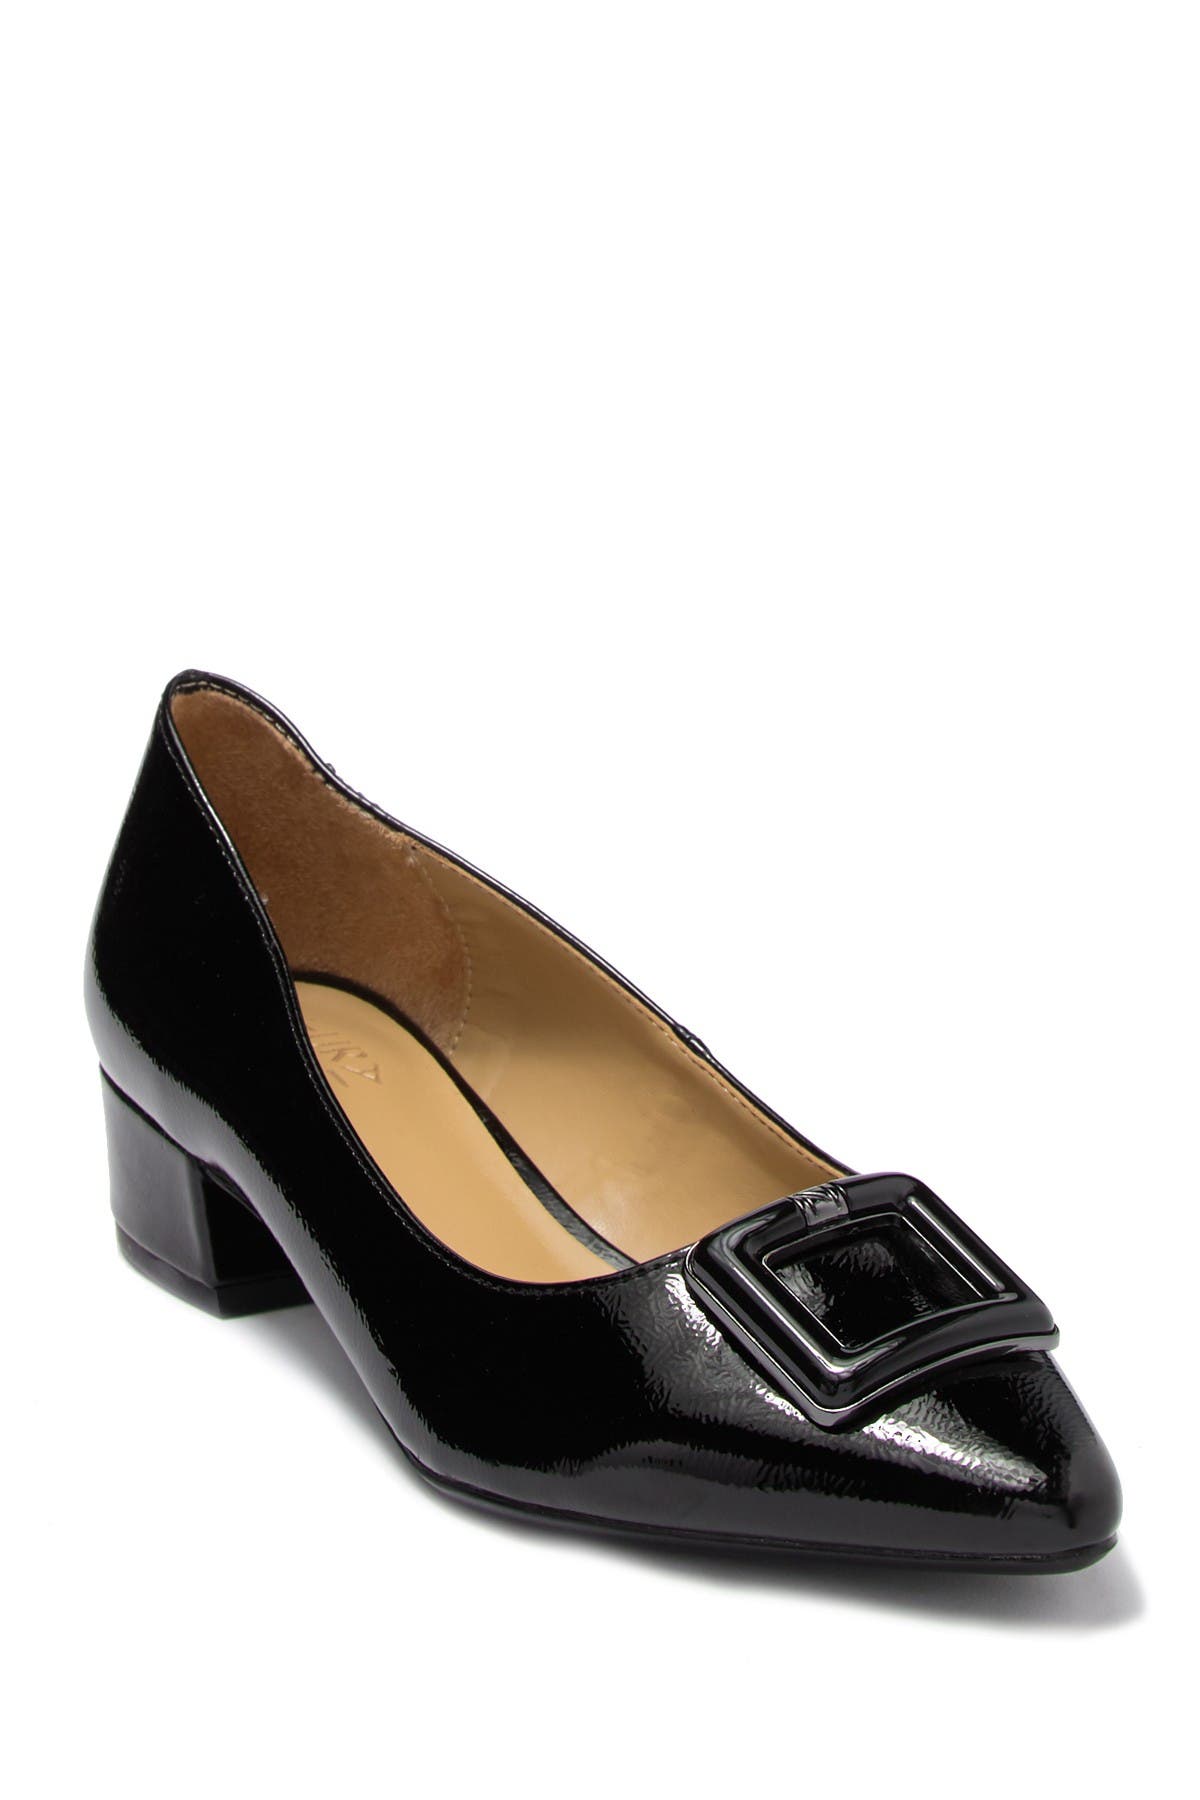 Naturalizer | Francie Pointed Toe 